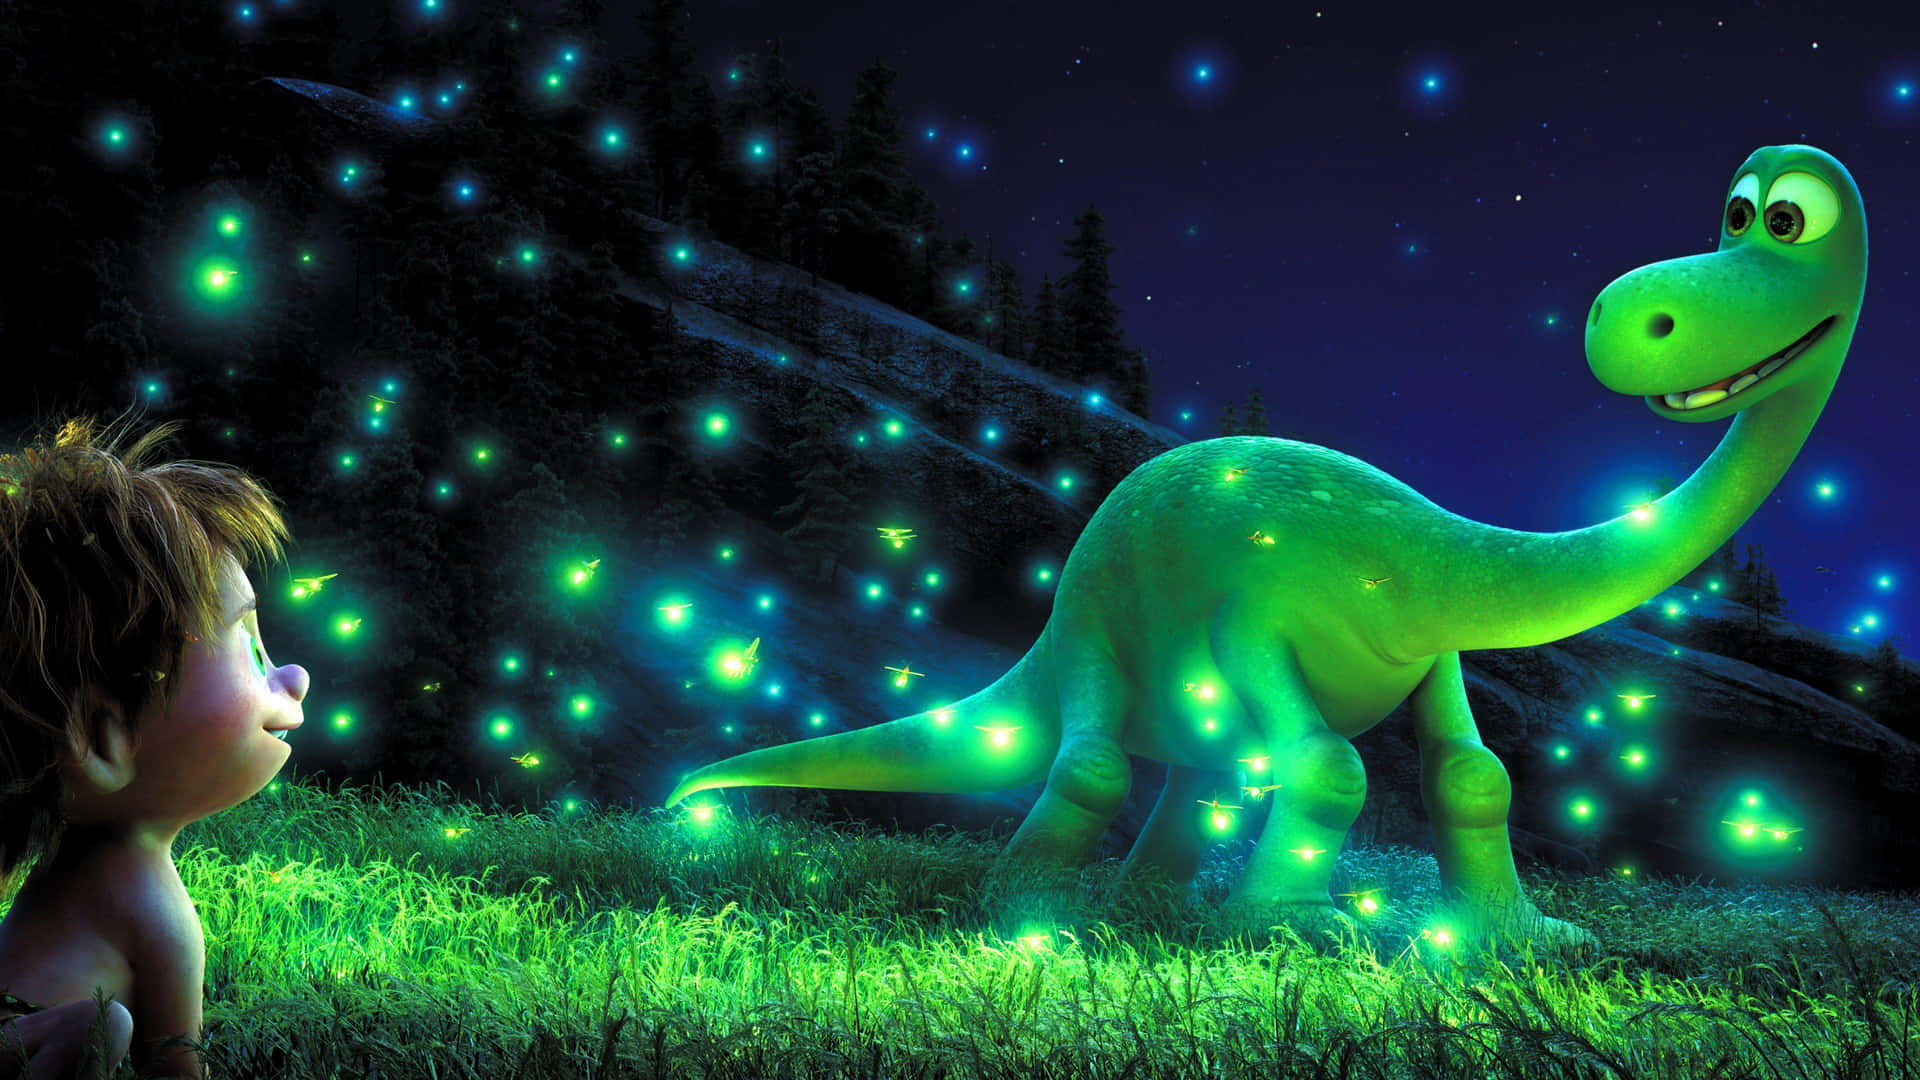 Magical Night With Friendly Dinosaur Wallpaper